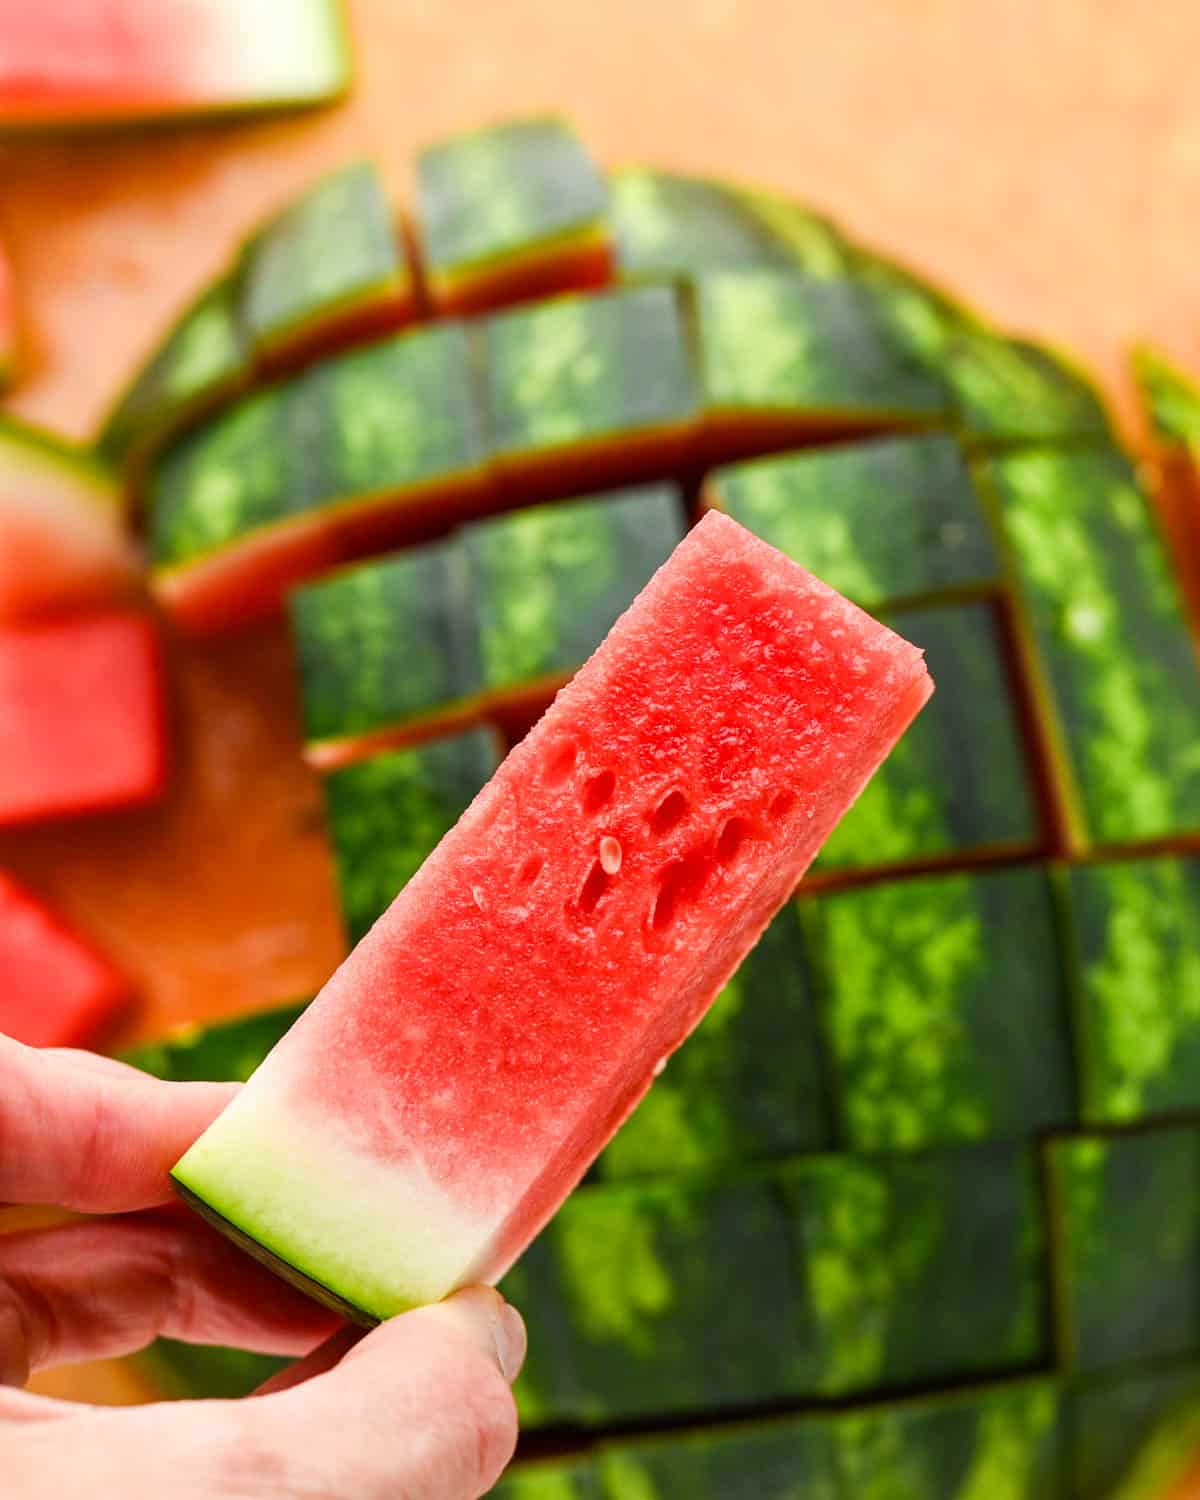 Holding a wedge of sliced watermelon.